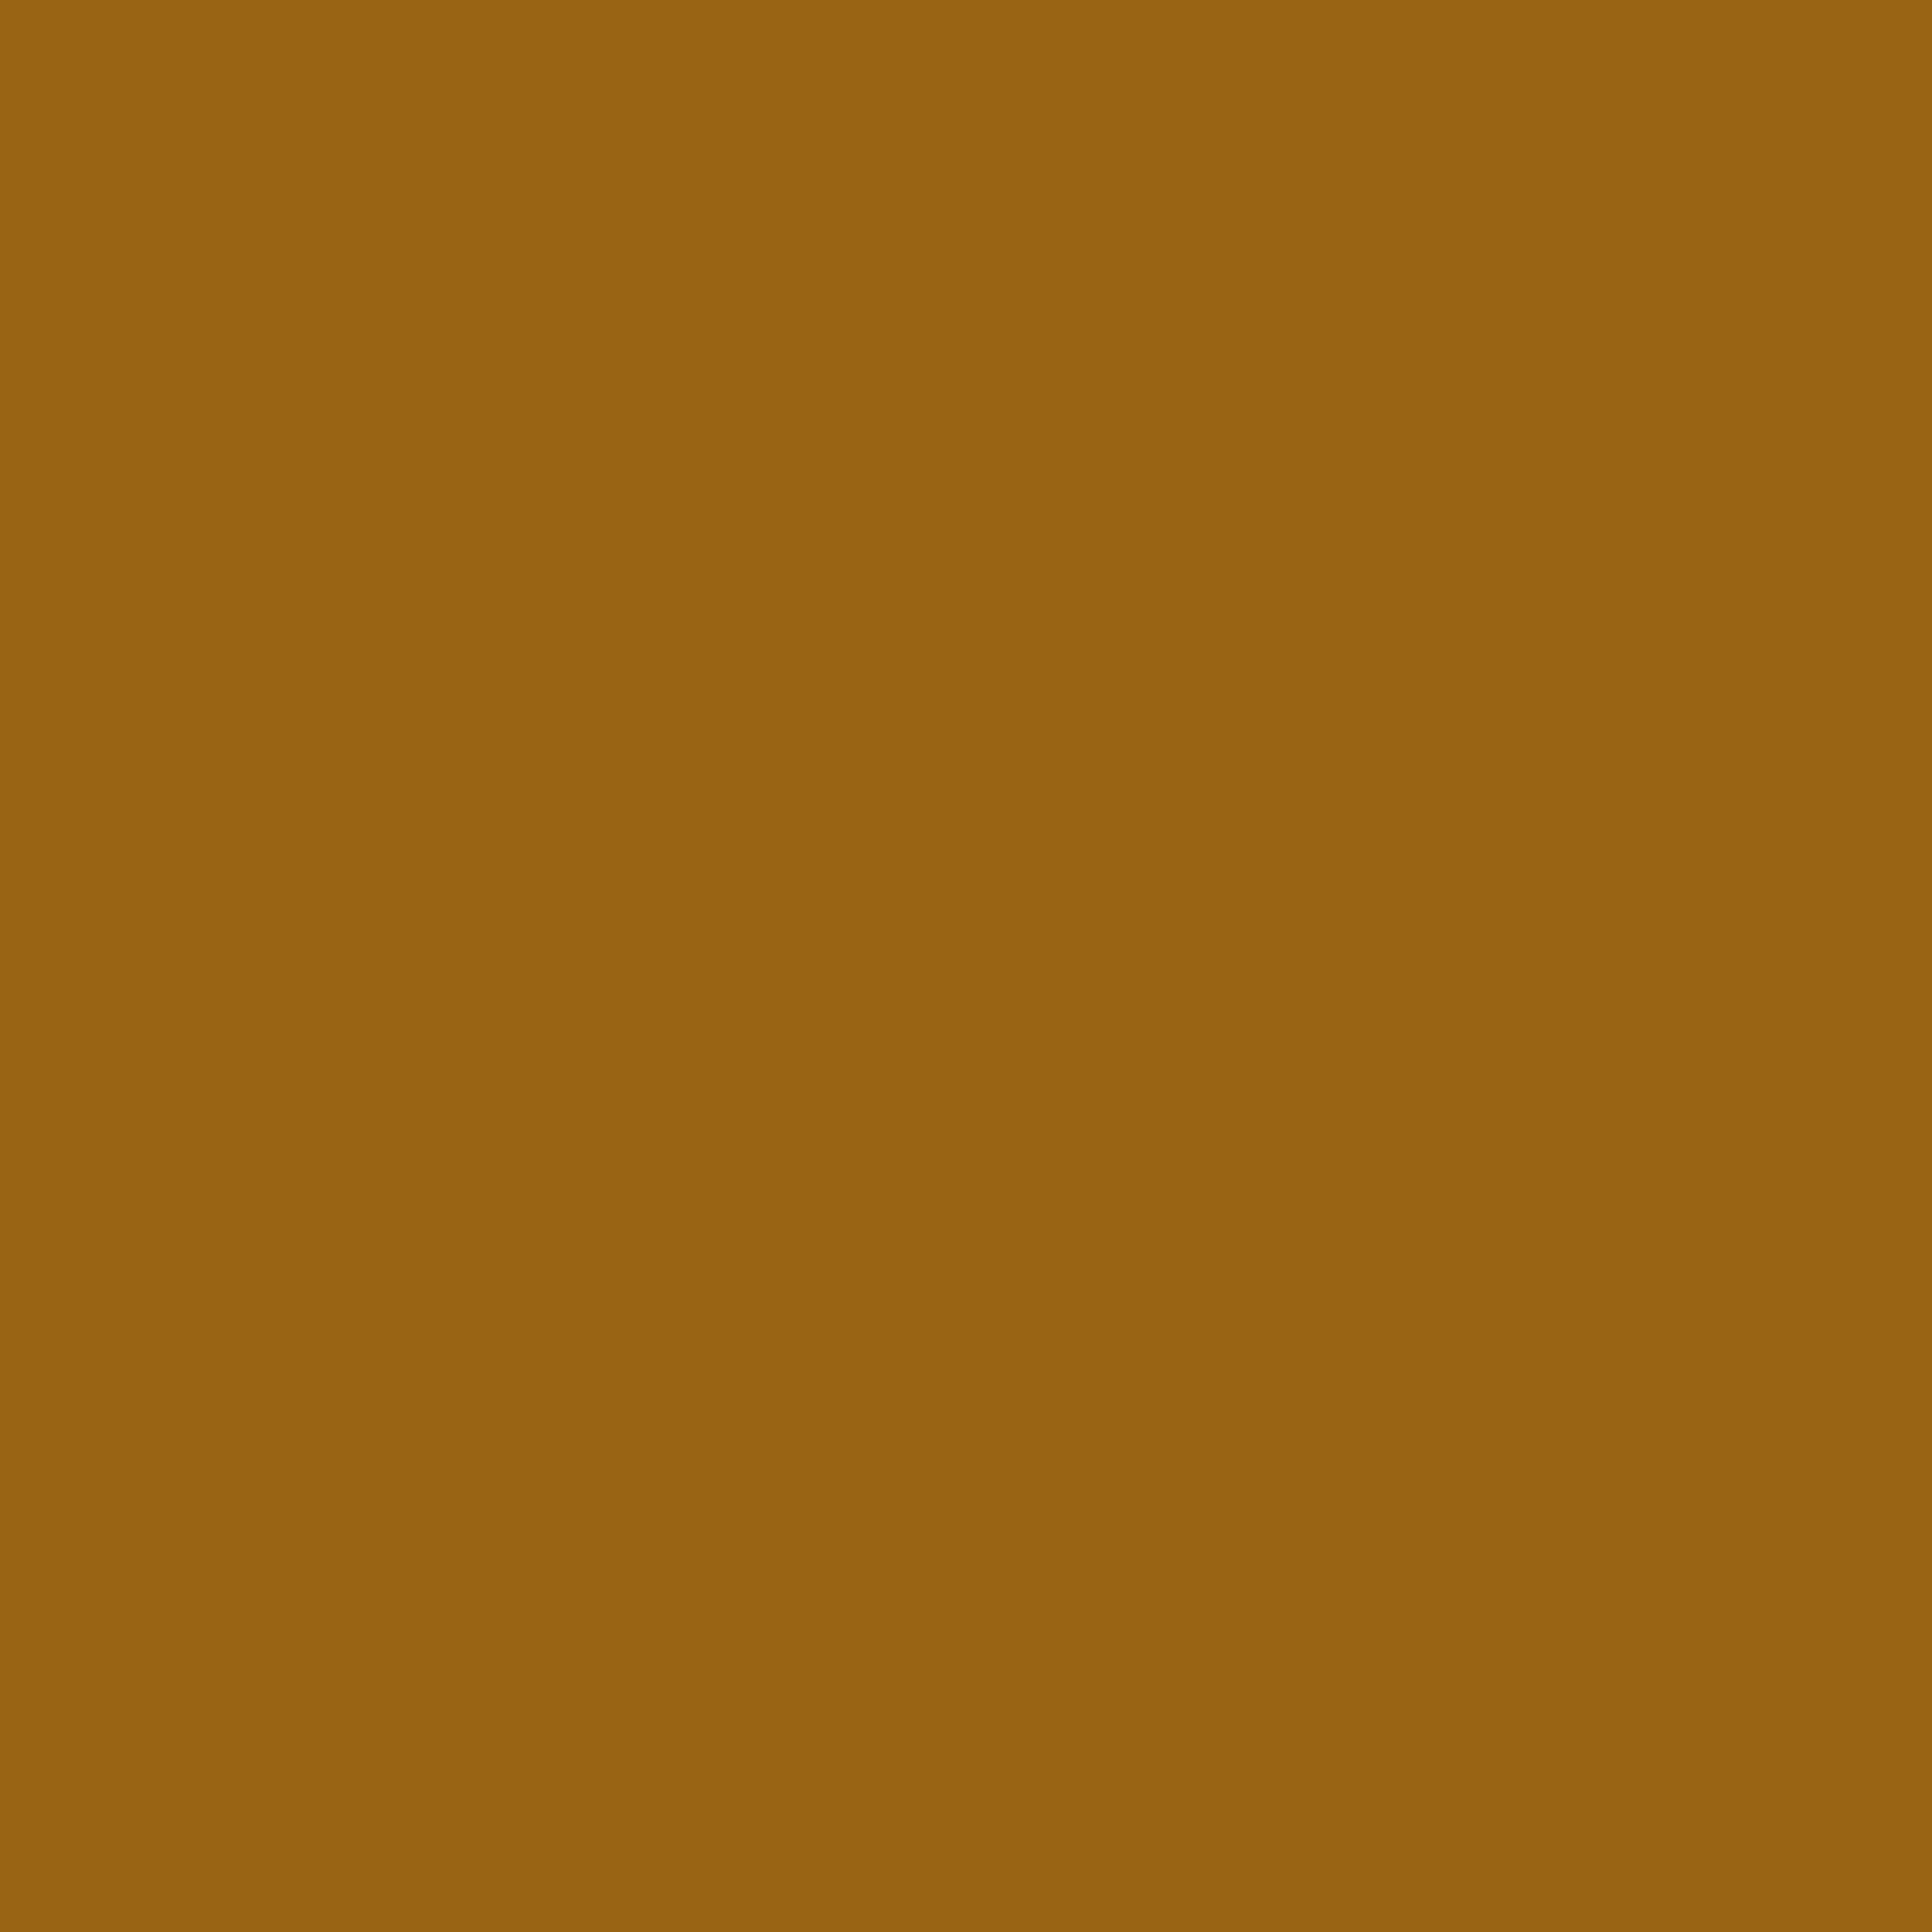 2048x2048 Golden Brown Solid Color Background